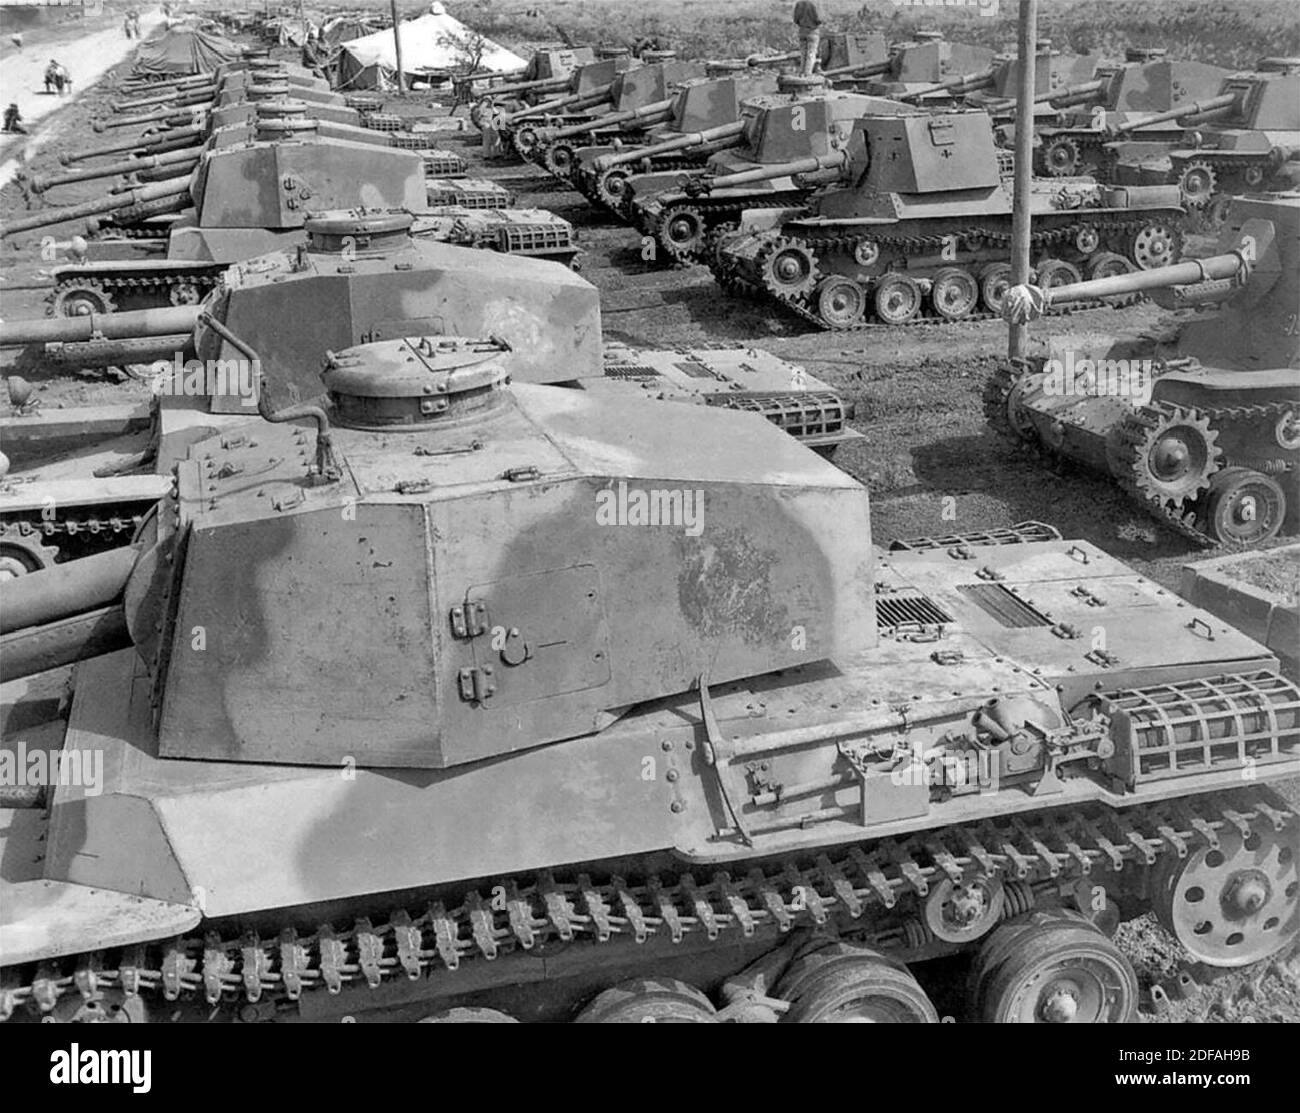 Type 3 Chi-Nu tanks of the 4th Tank Division, with a few Type 3 Ho-Ni III self-propelled guns among them, 1945 Stock Photo